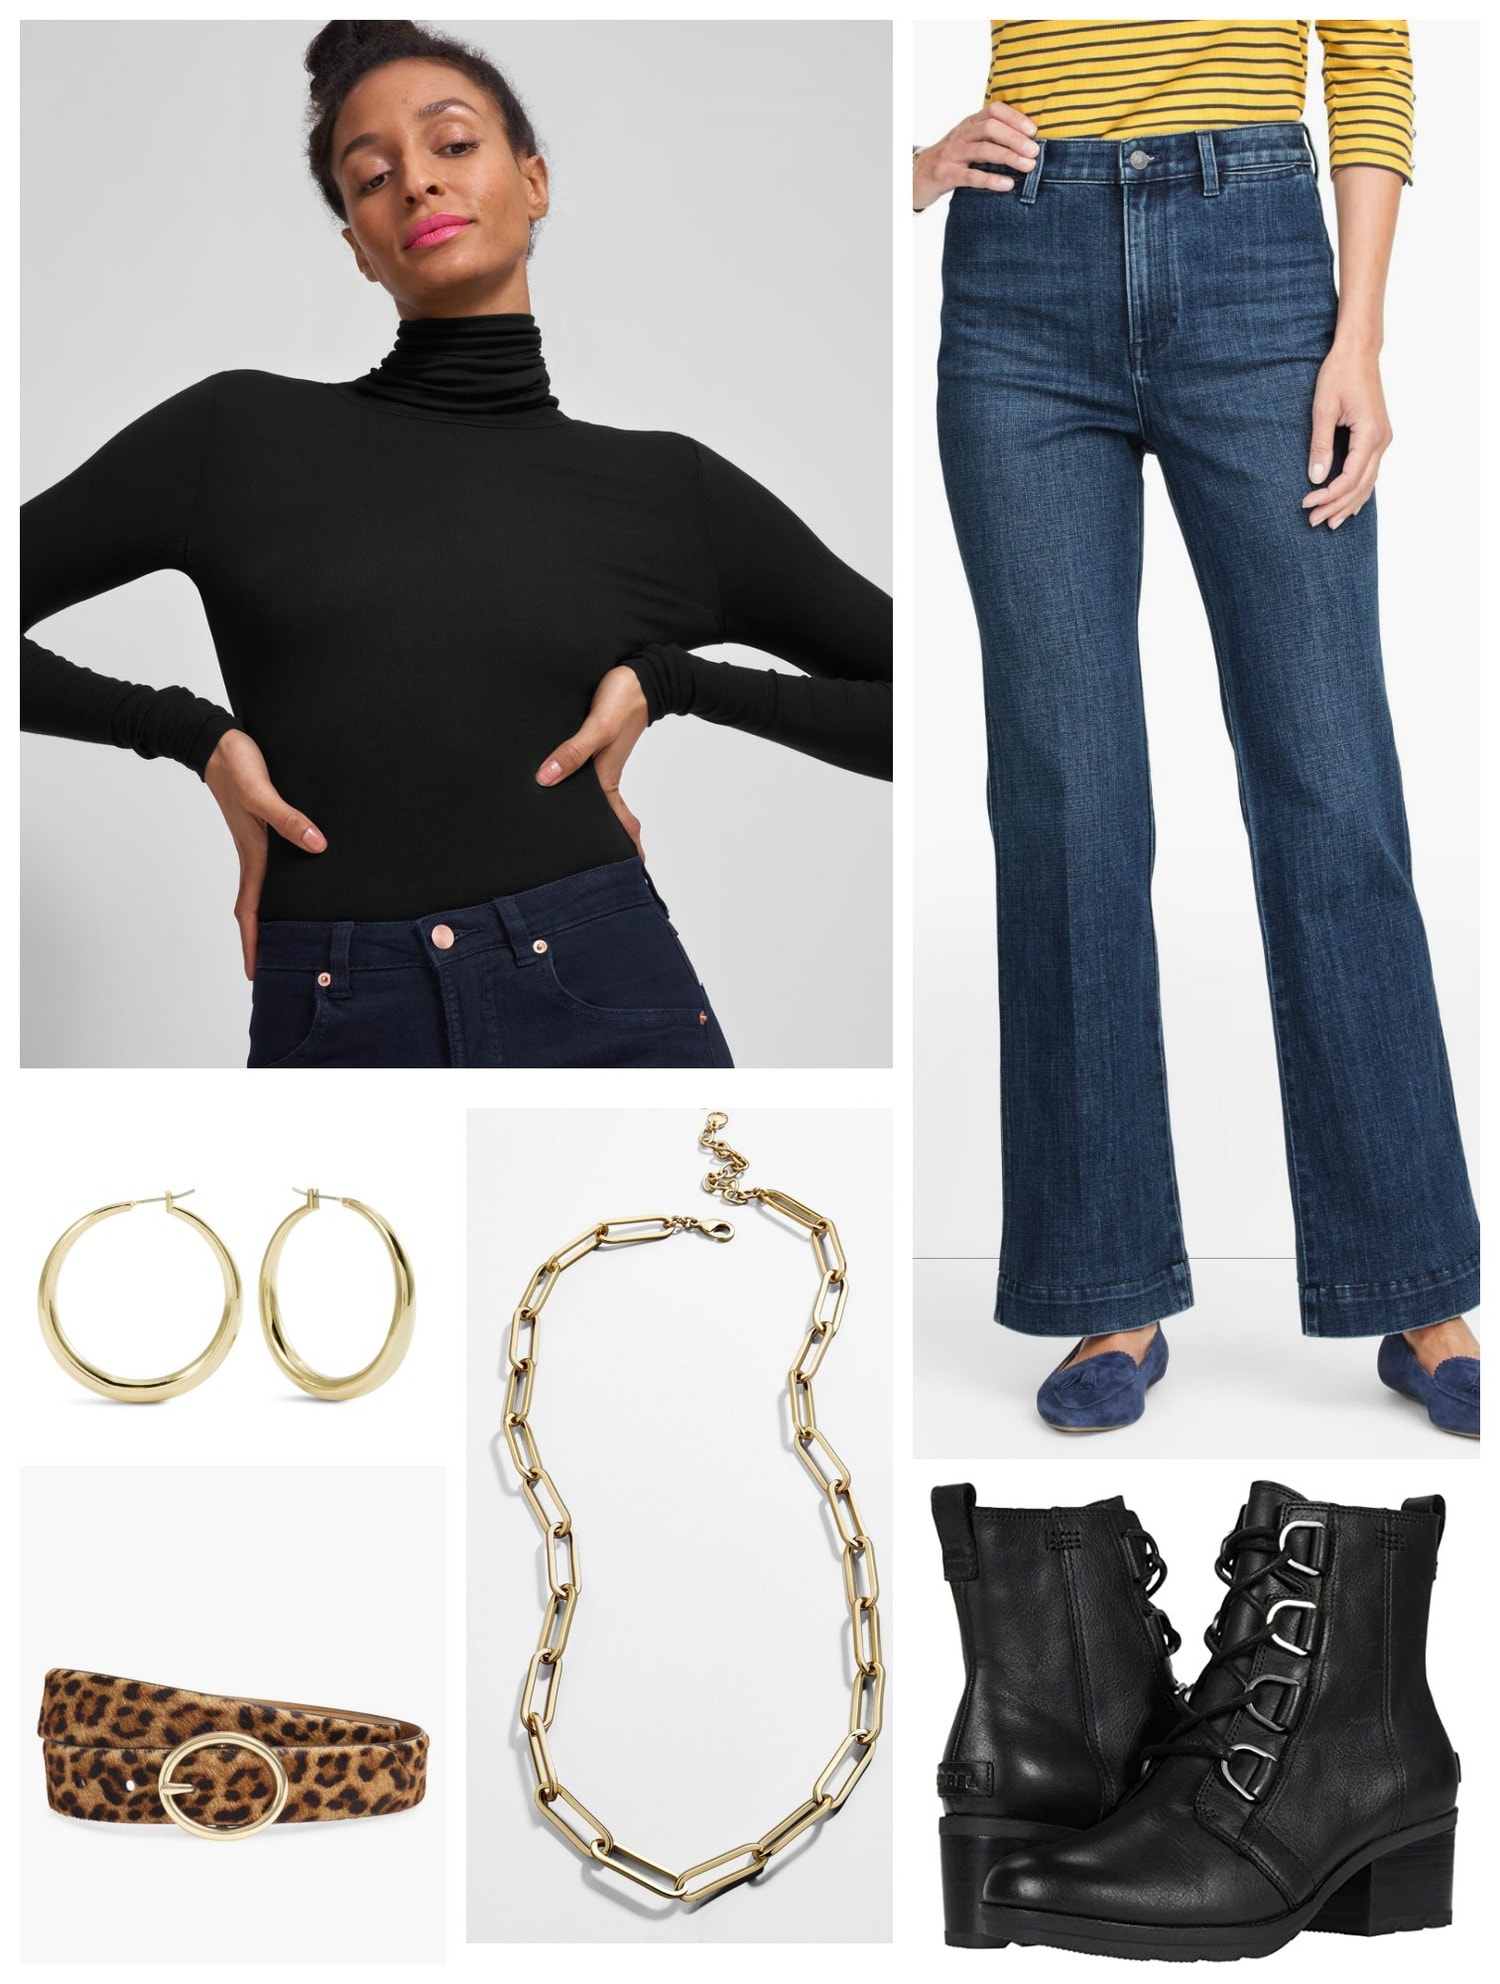 Cozy Sophistication with a black turtleneck and flared jeans with gold hoops.